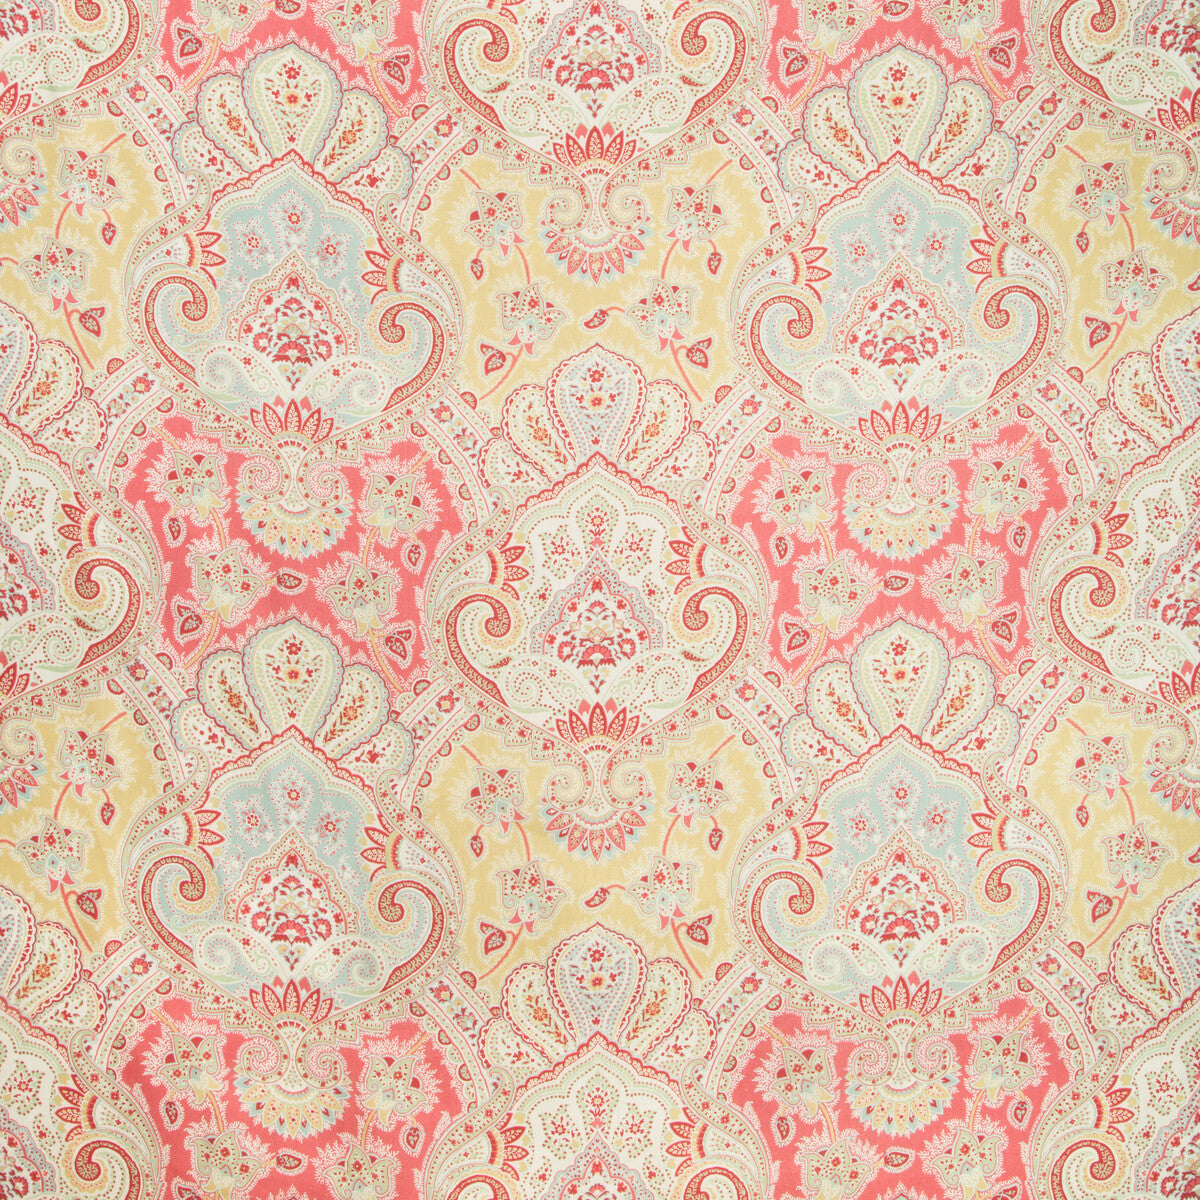 Echocyprus fabric in festival color - pattern ECHOCYPRUS.419.0 - by Kravet Basics in the Echo Greenwich collection